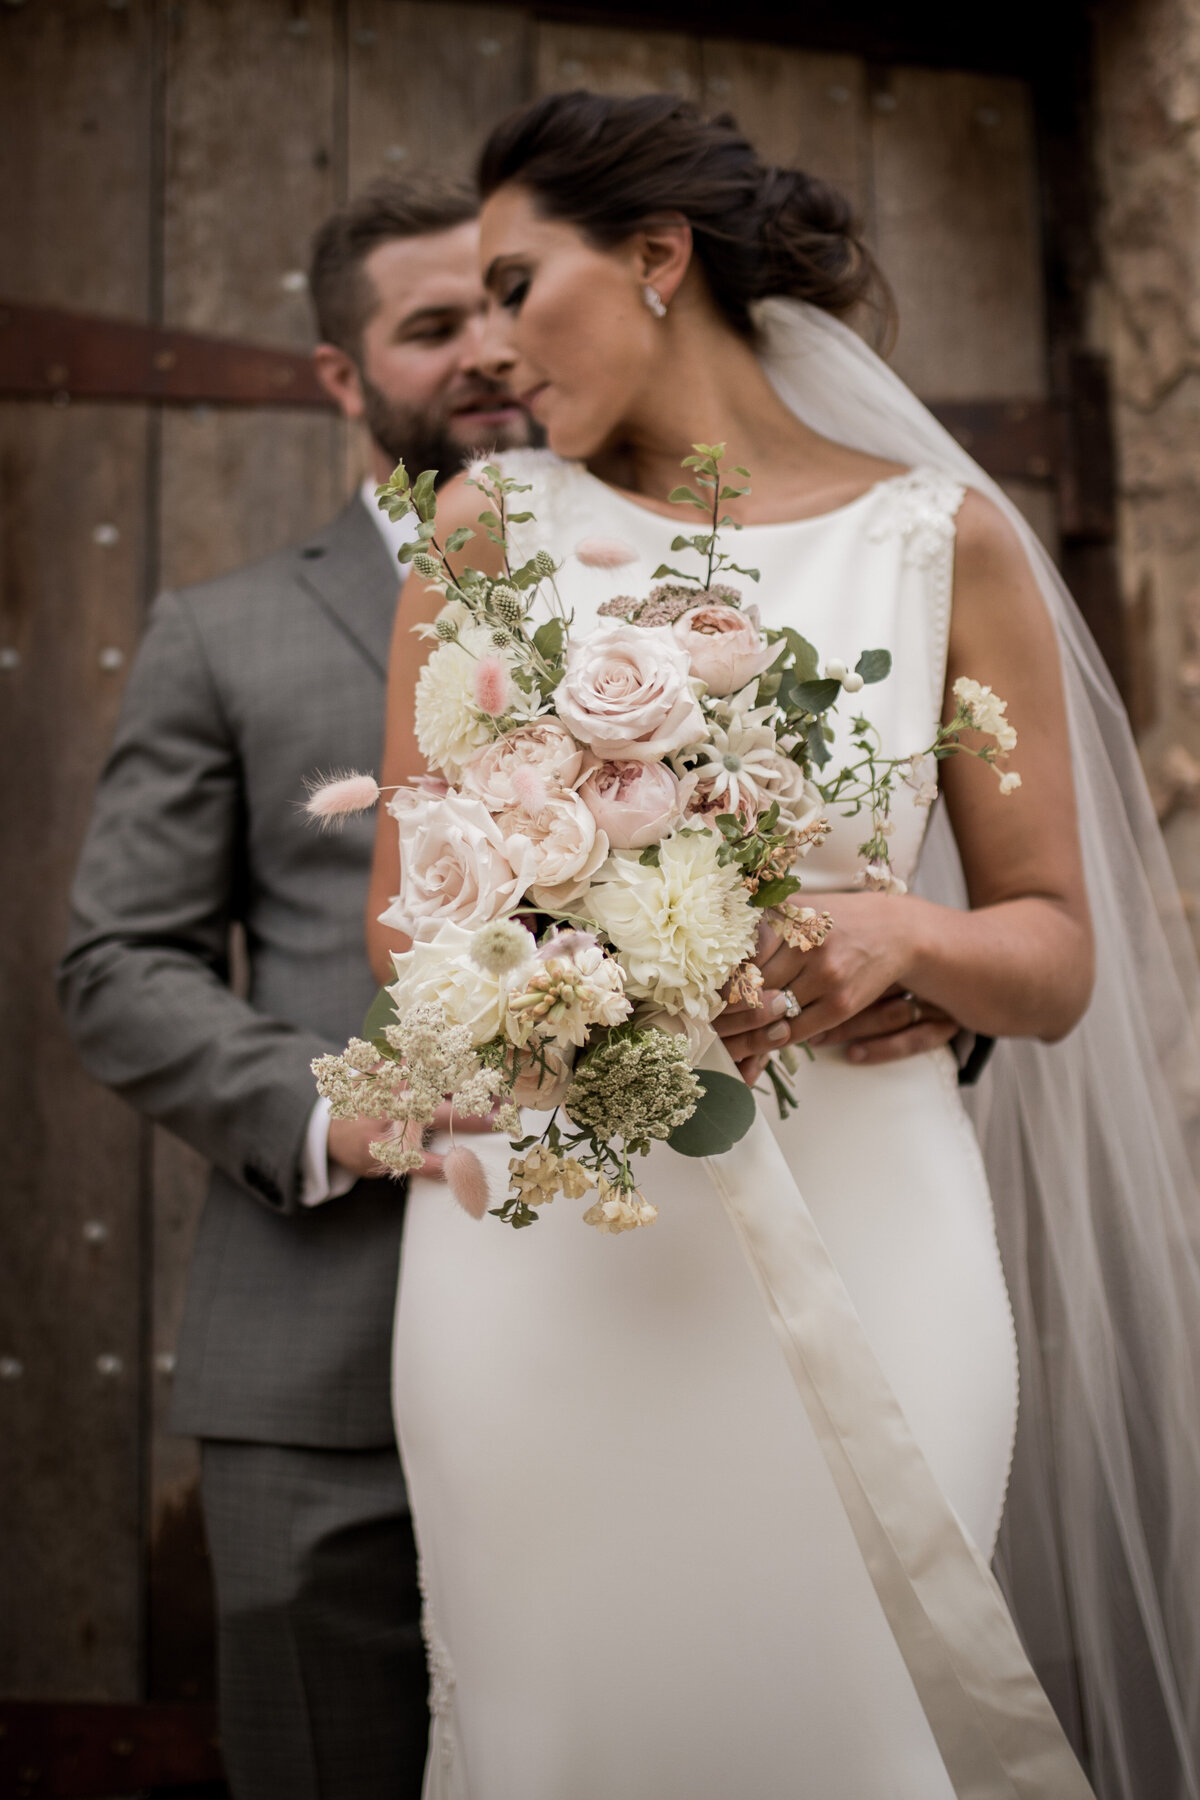 S&T-Paxton-Wines-Rexvil-Photography-Adelaide-Wedding-Photographer-171